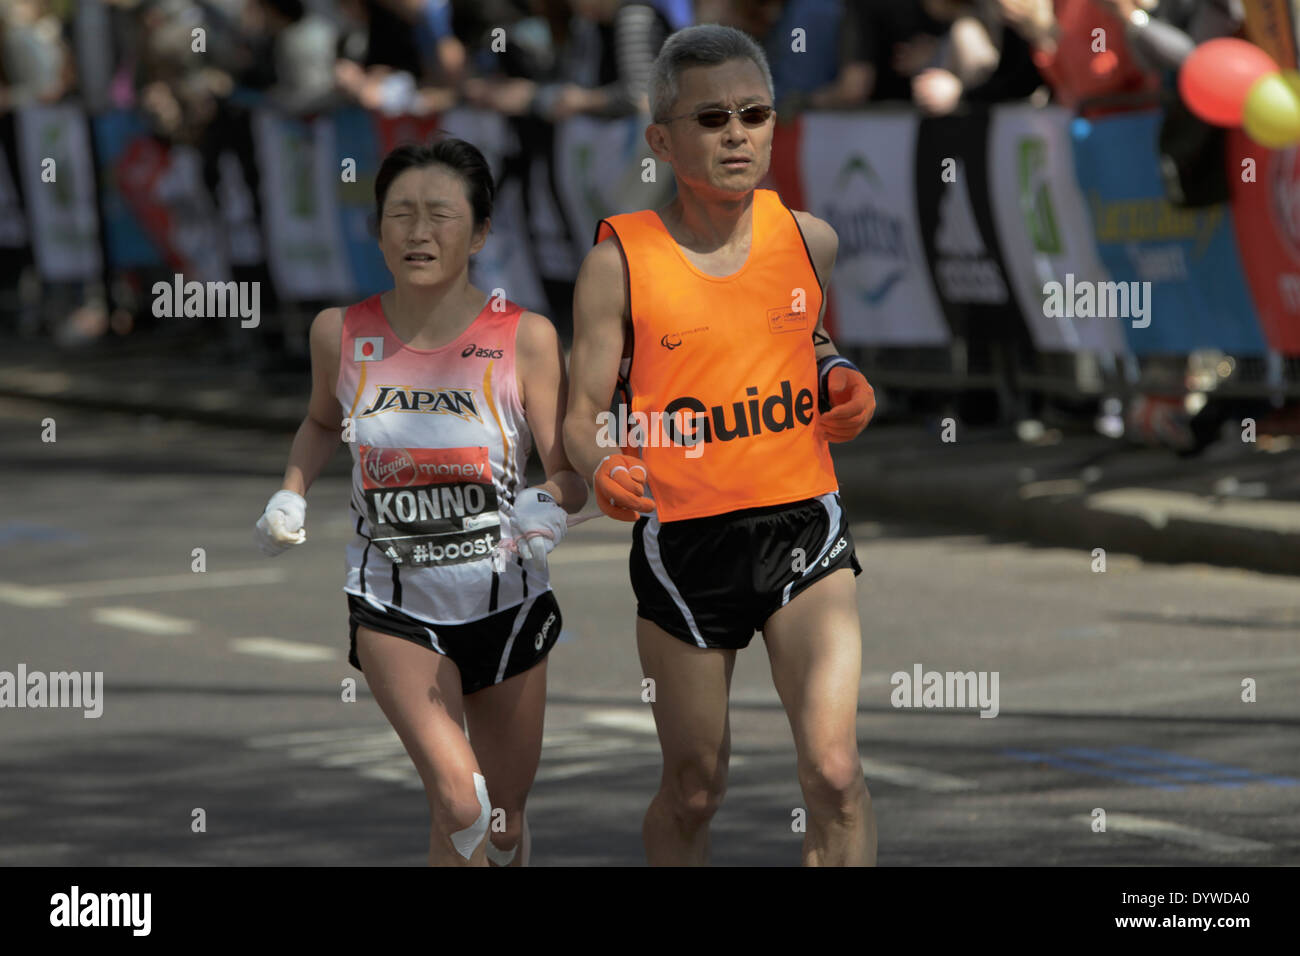 Disabled athlete with a guide at London Marathon Stock Photo